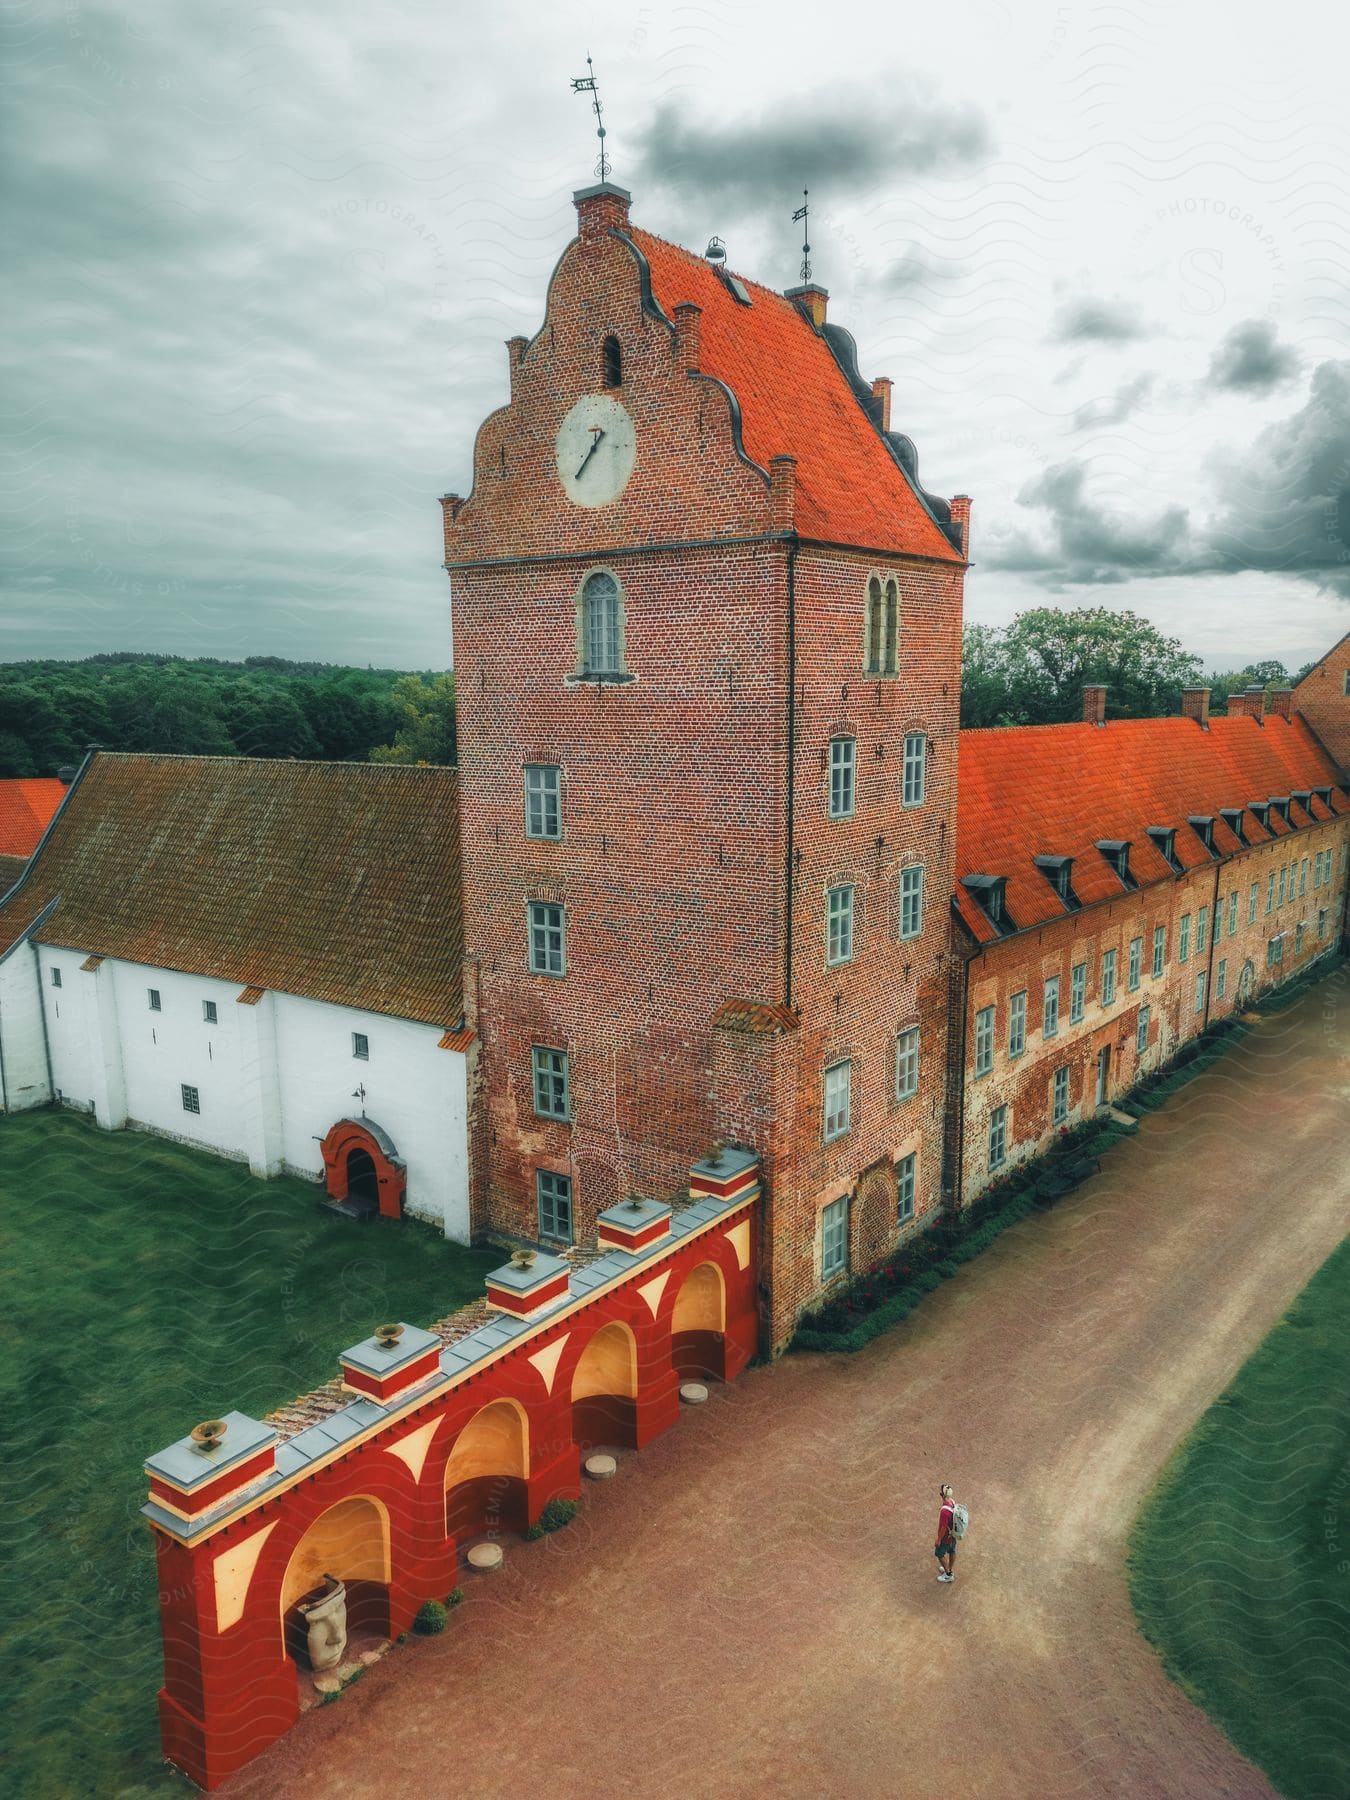 Bäckaskog Slott, a brick castle with an orange roof and clock tower, stands alone on a cloudy day, with a lone tourist walking on the dirt road in front of it.